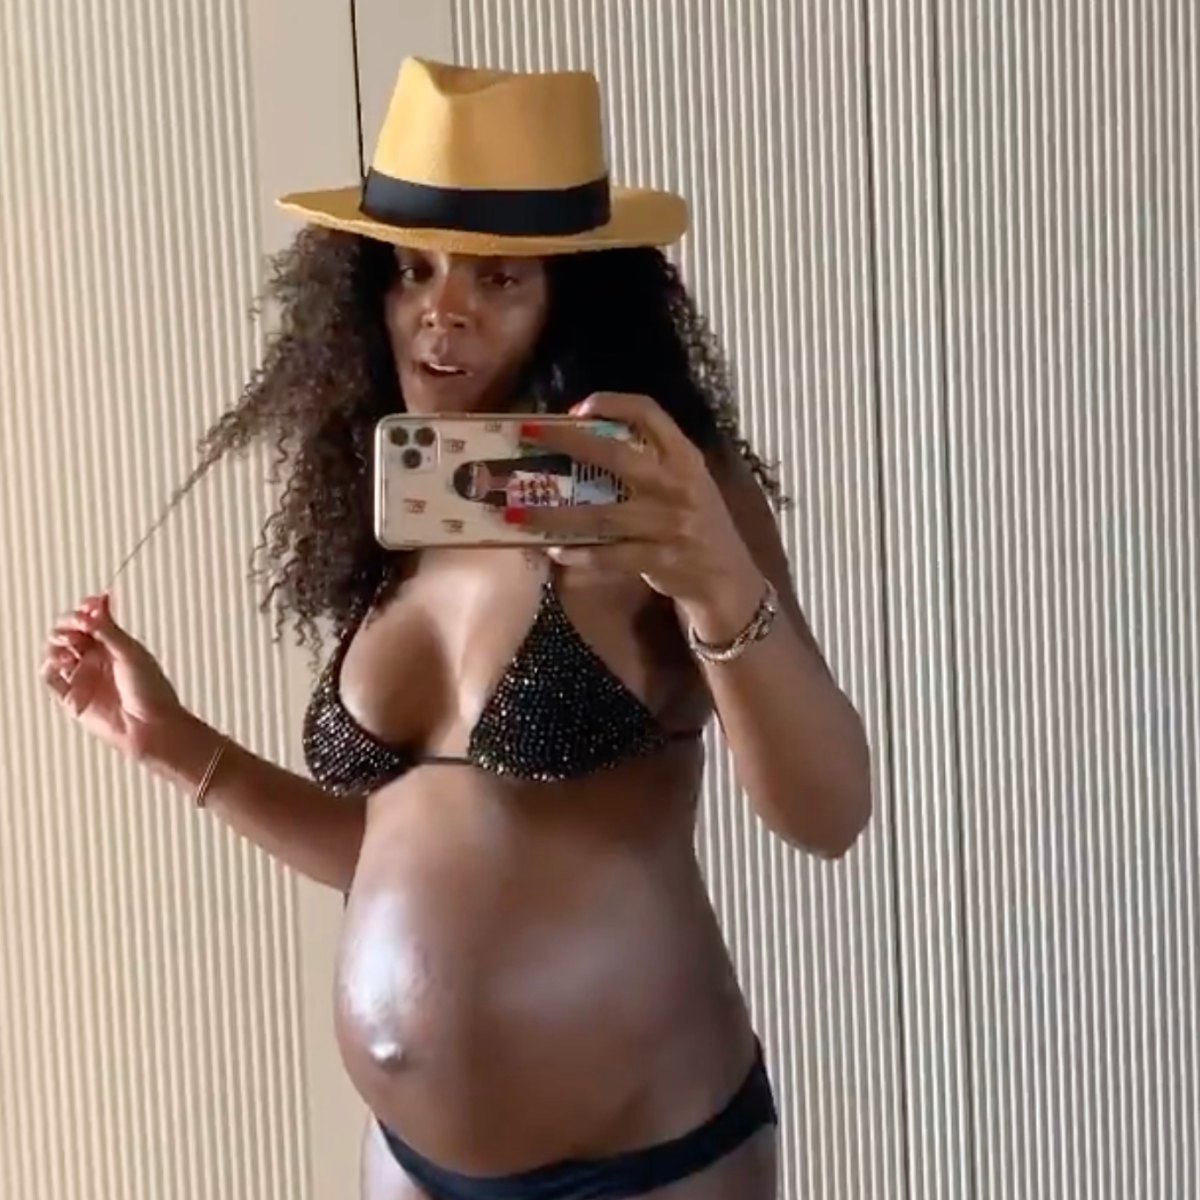 https://www.closerweekly.com/wp-content/uploads/2022/08/Kelly-Rowland-Bikini-Photos-Sexiest-Swimsuit-Pictures-2.jpg?resize=1200%2C1200&quality=86&strip=all